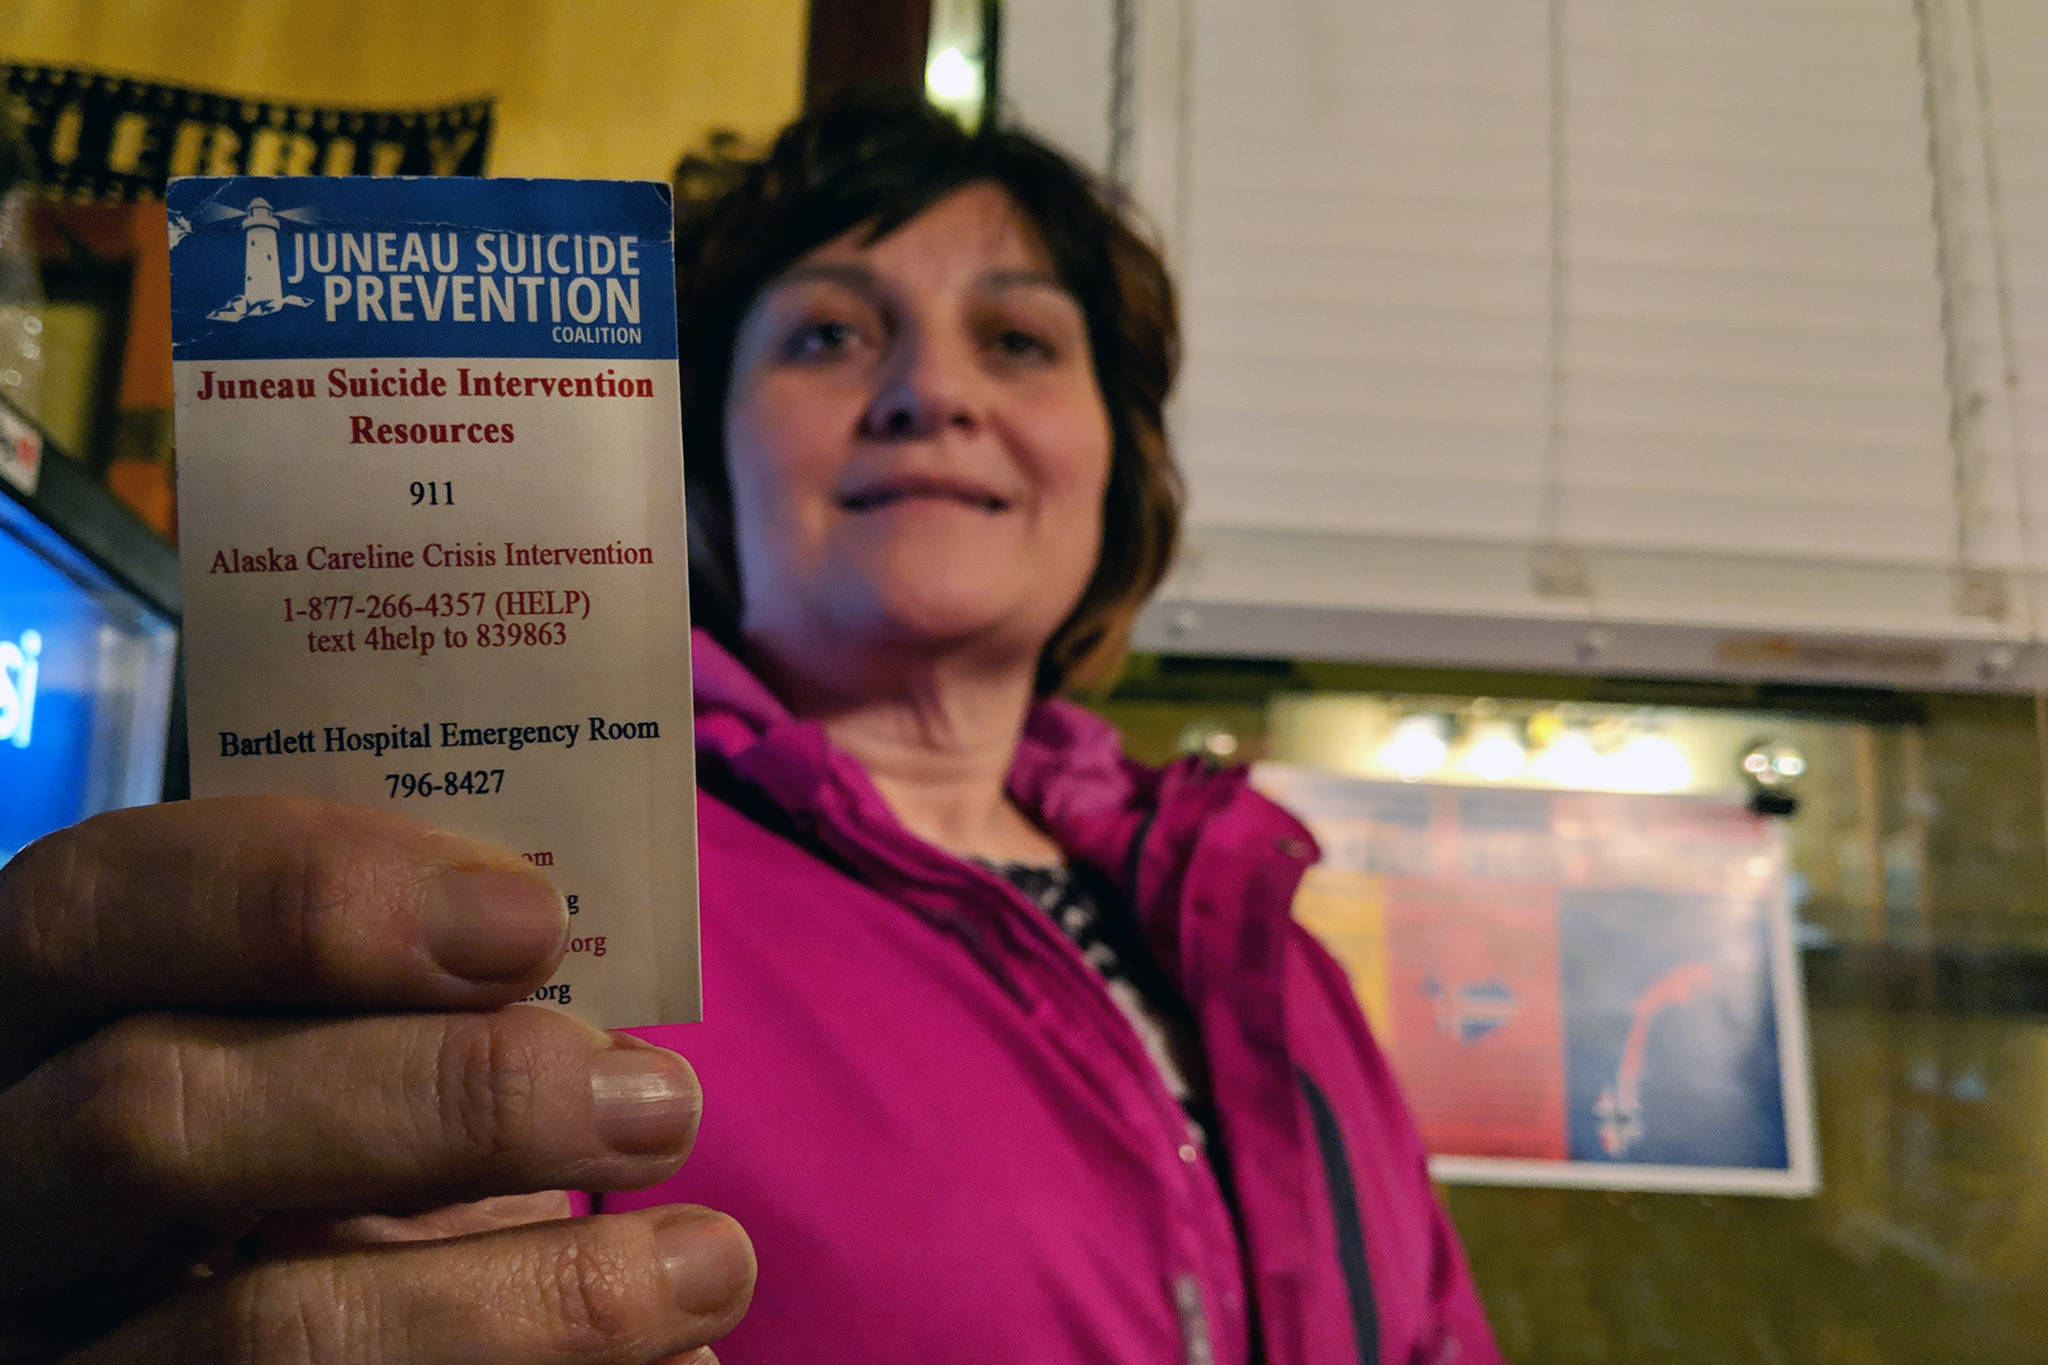 Jan Reece, outreach/training specialist for Juneau Suicide Prevention Coalition, holds up a card with contact information for suicide prevention resources after a screening of “The S-Word” at Gold Town Theater in March 2019. (Ben Hohenstatt | Juneau Empire file)